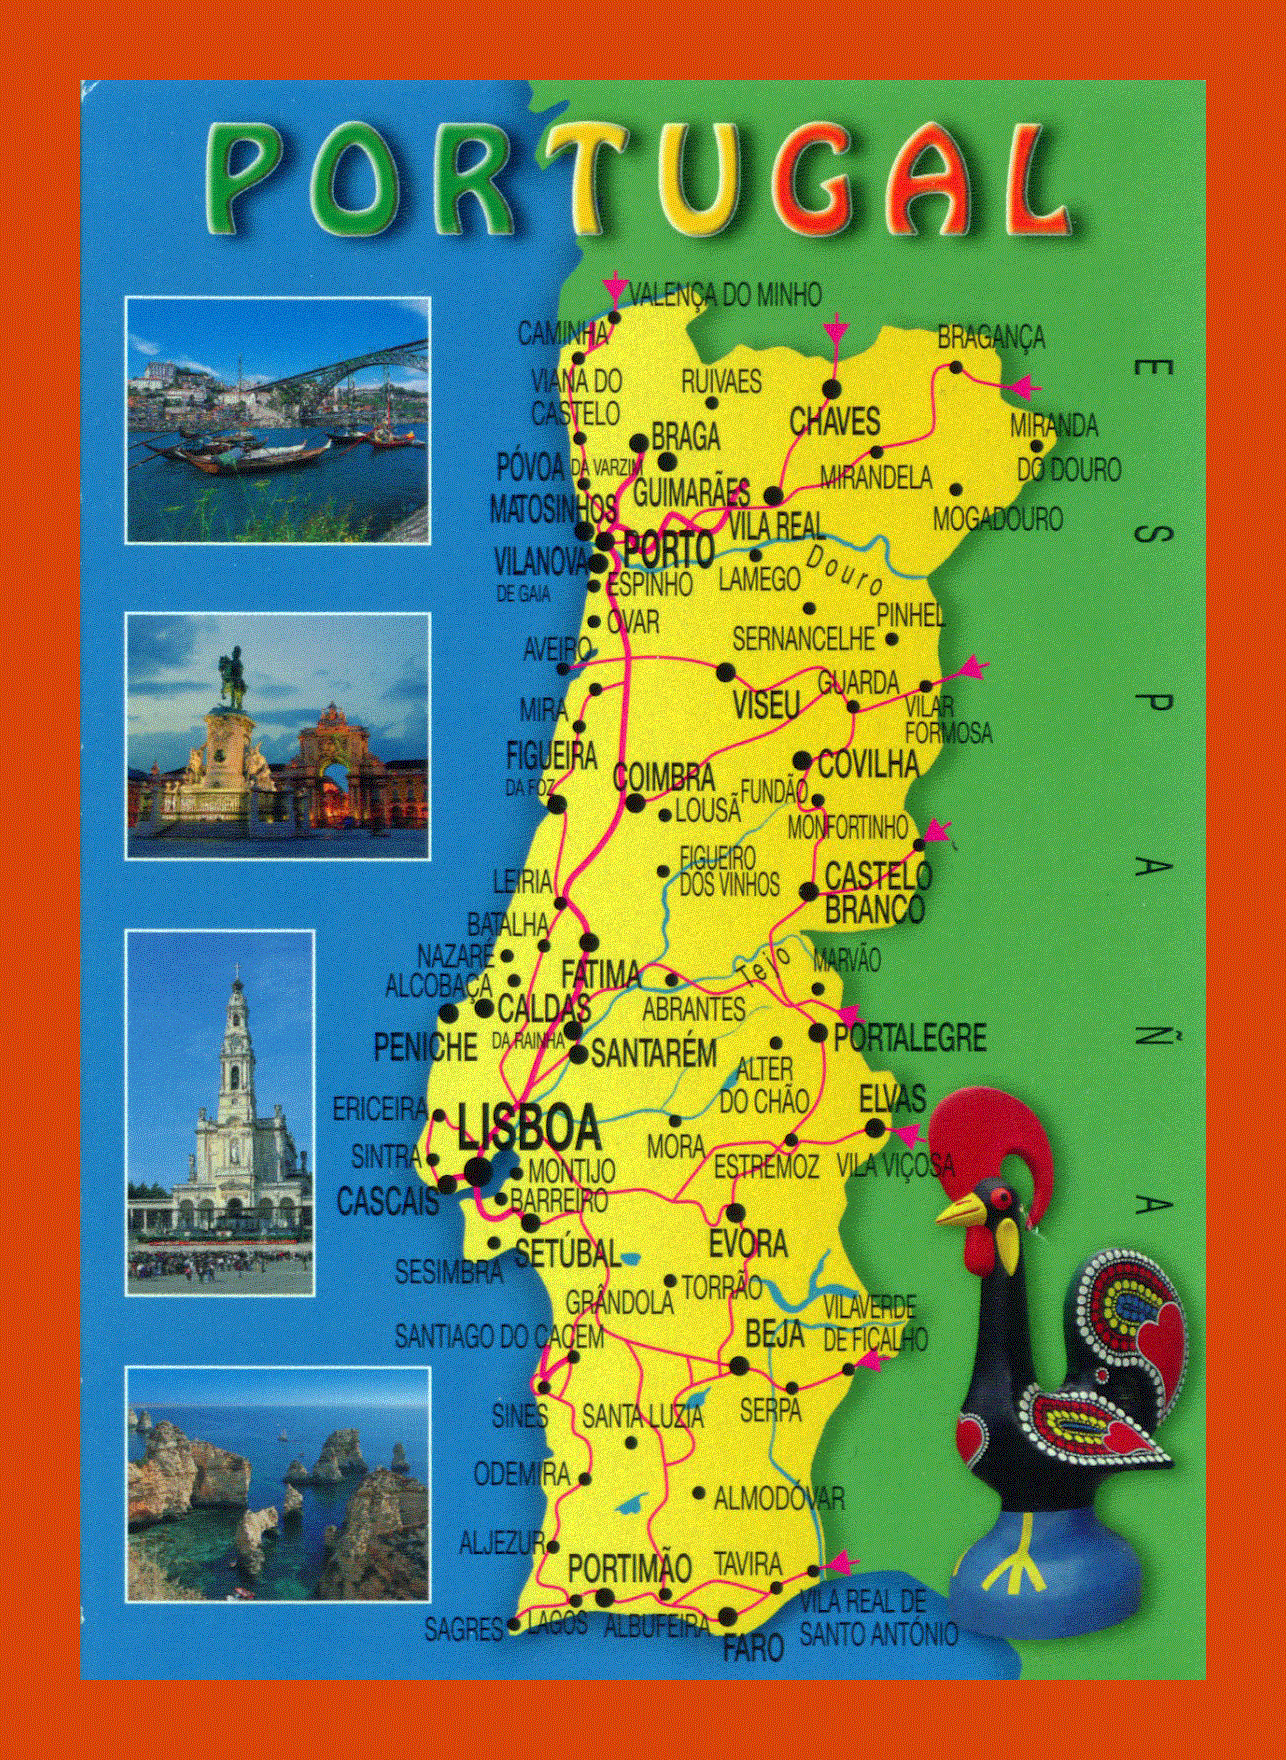 Road map of Portugal, Maps of Portugal, Maps of Europe, GIF map, Maps  of the World in GIF format